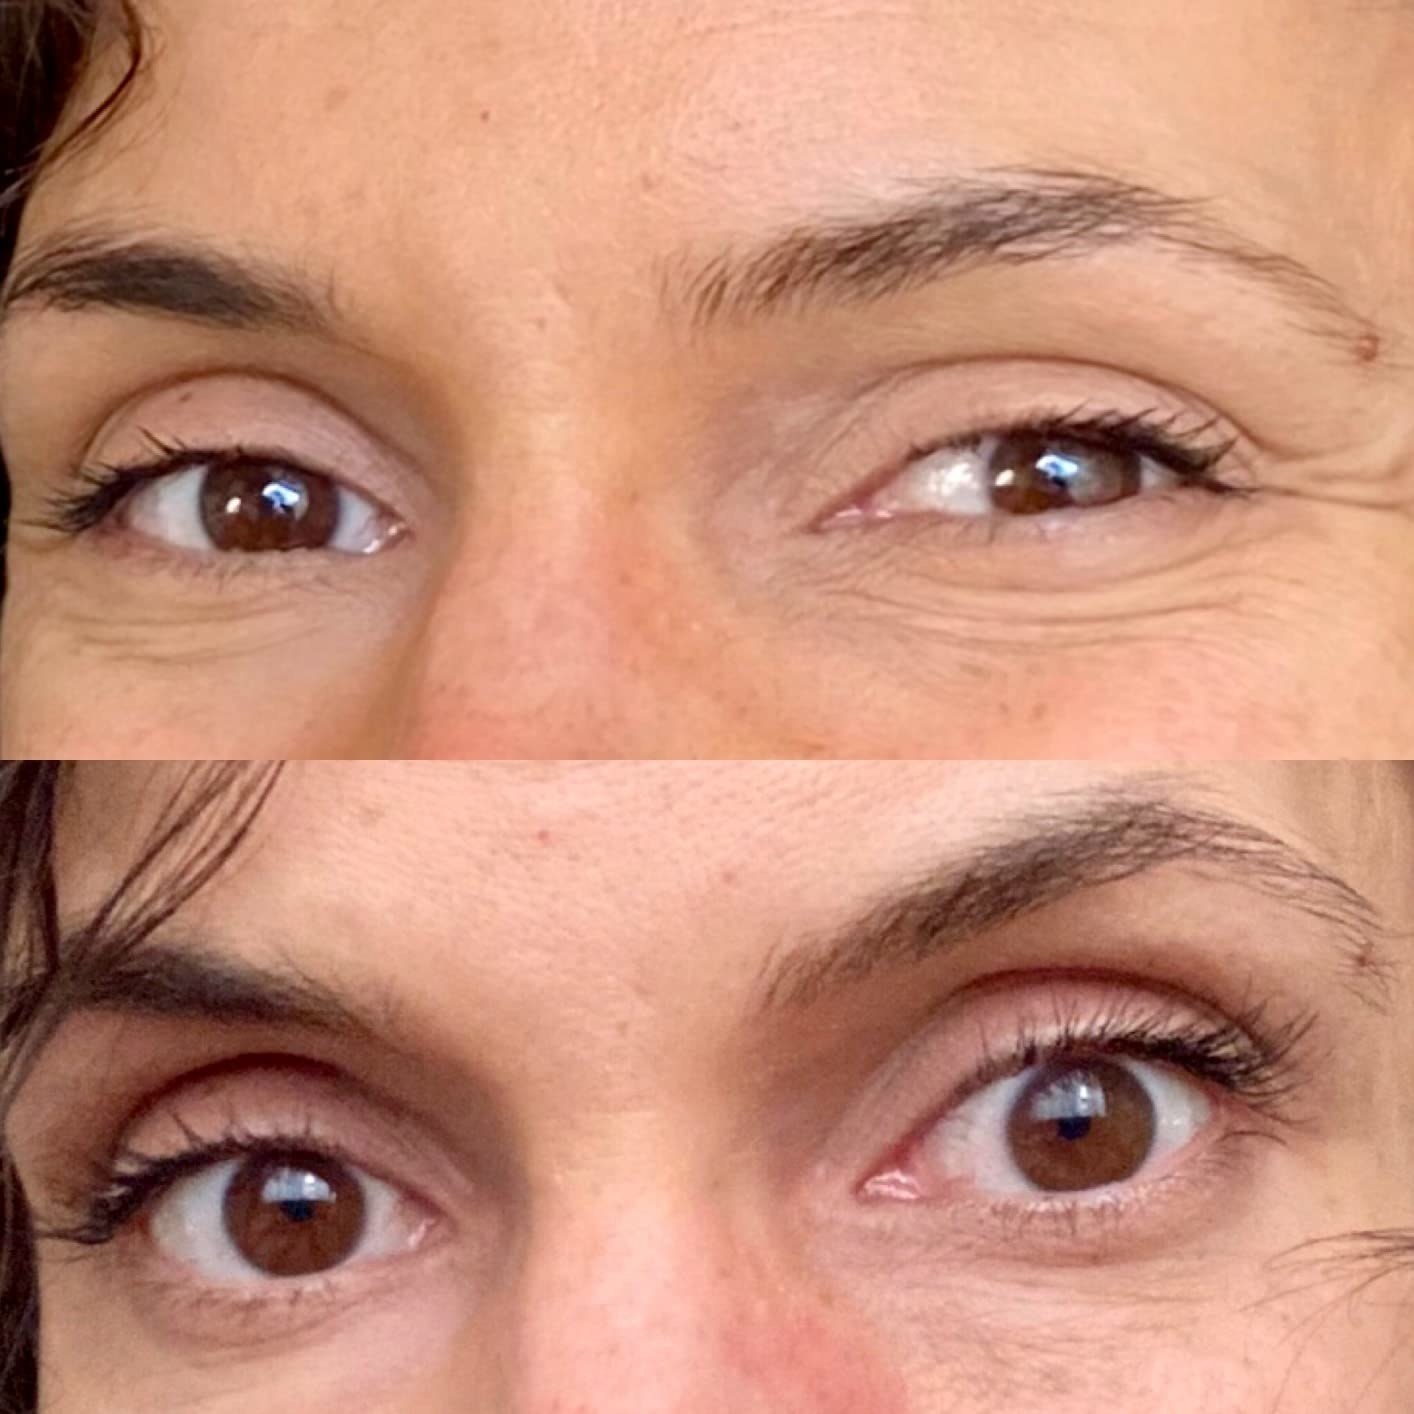 Reviewer image of their lashes before and after using the serum